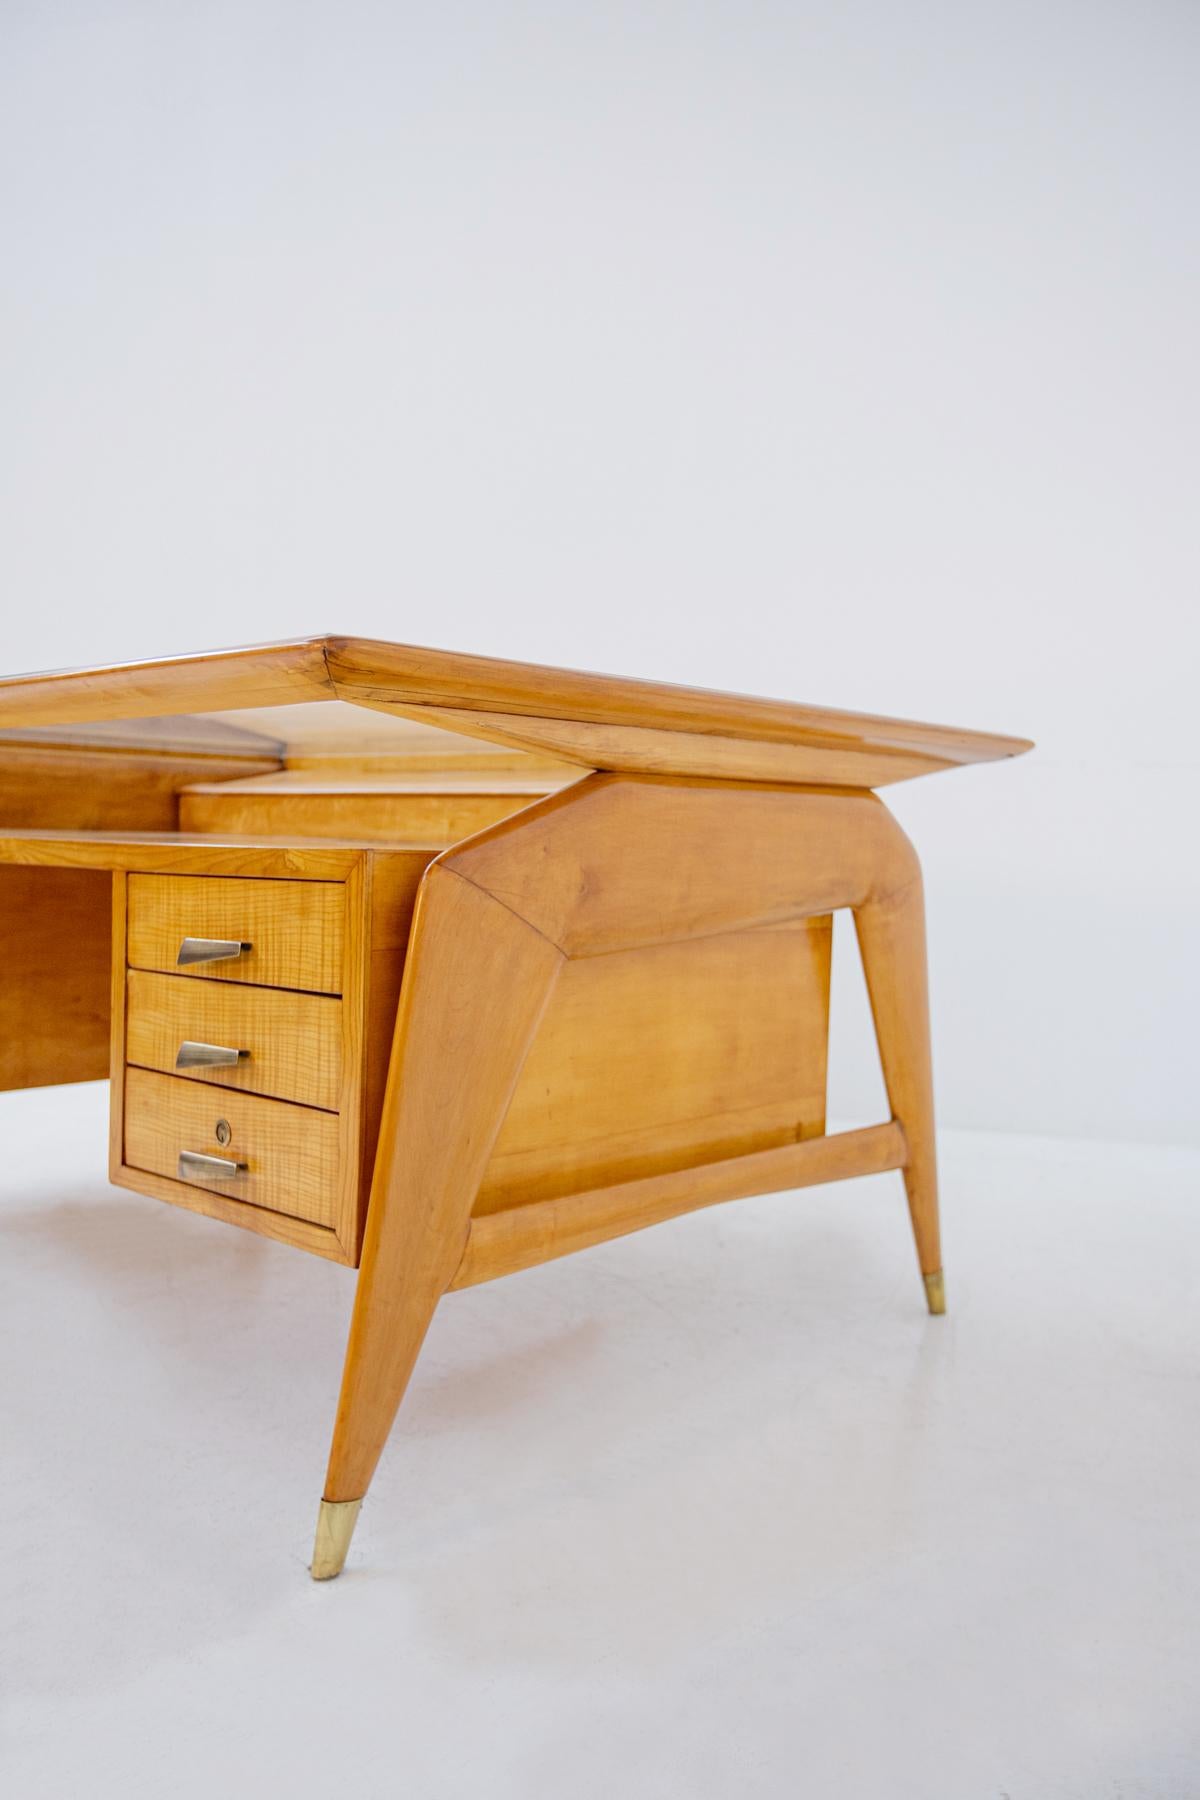 Carlo de Carli Important Desk in Wood Glass and Brass, 1950s Published 9